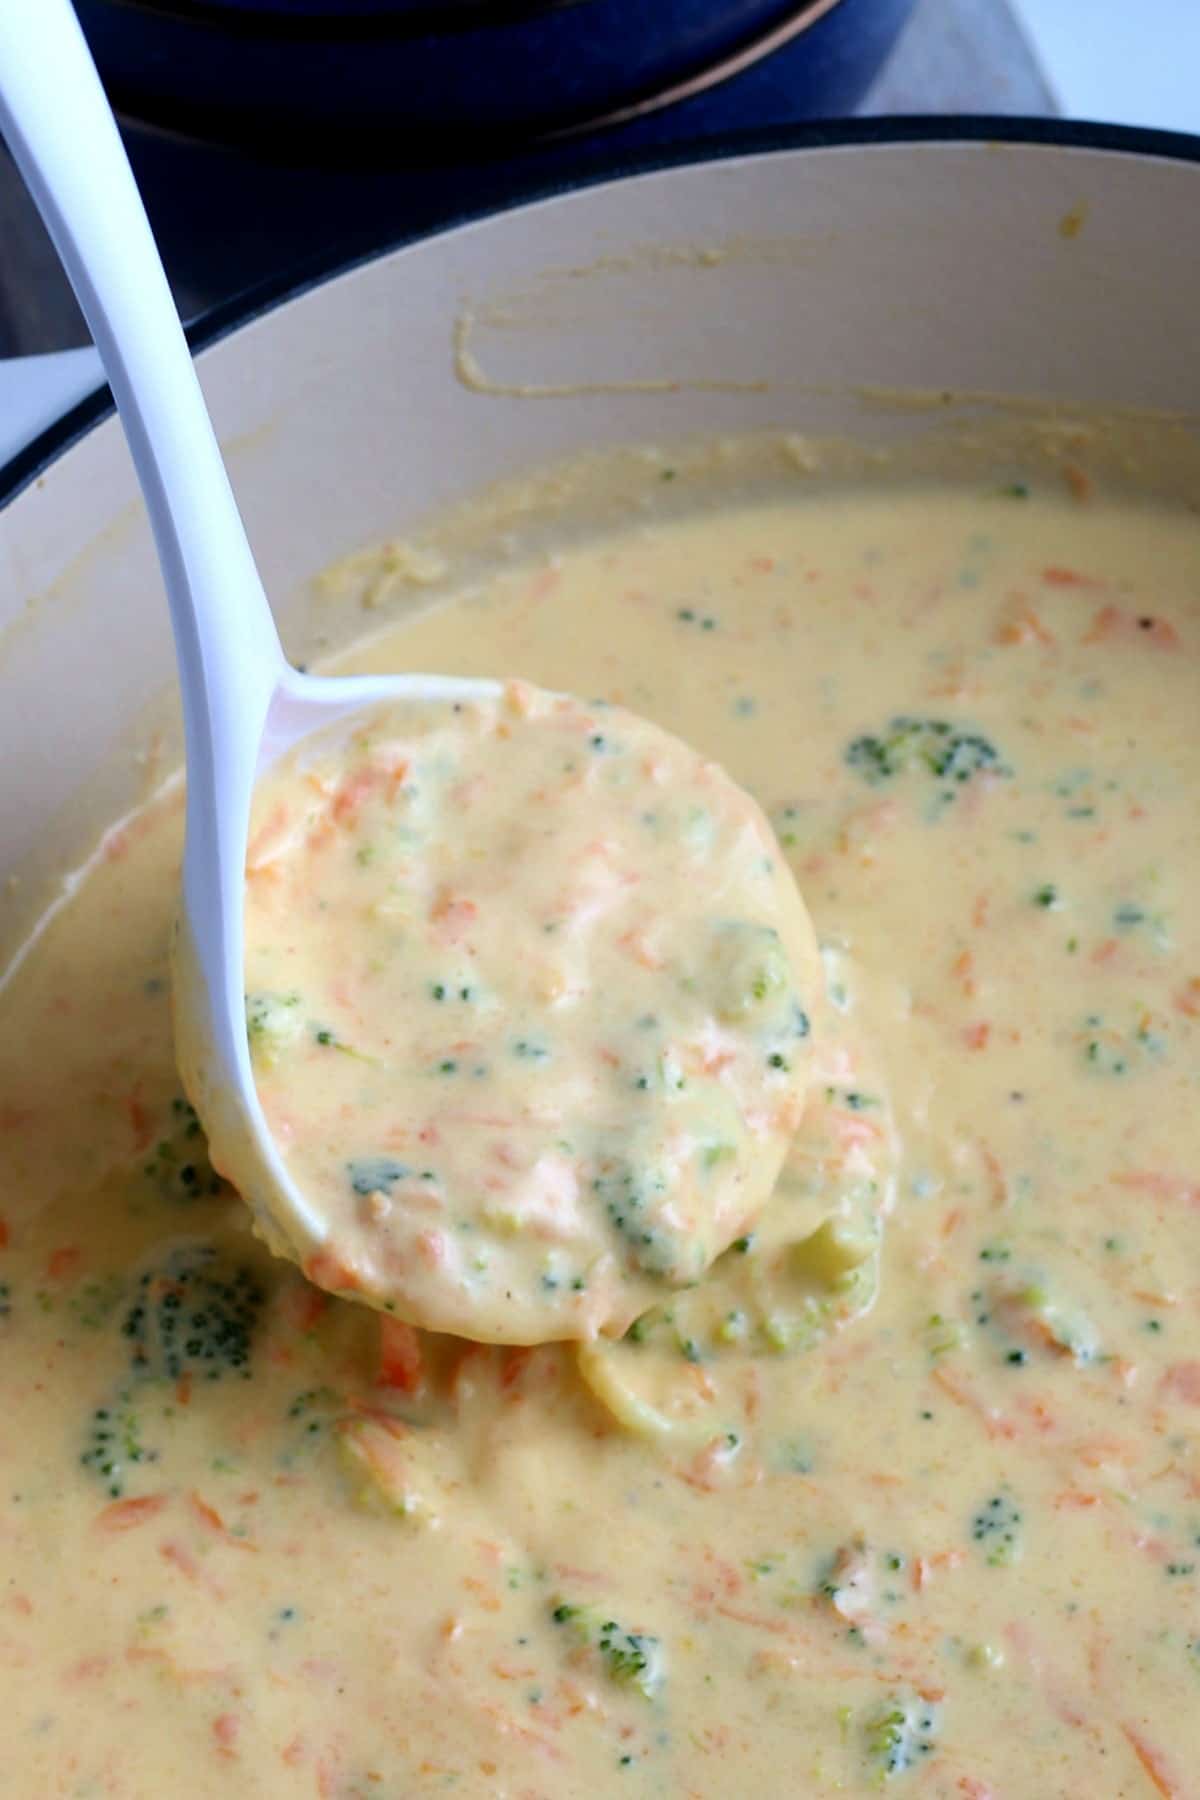 Close up of a ladle full of a creamy broccoli cheese soup recipe.